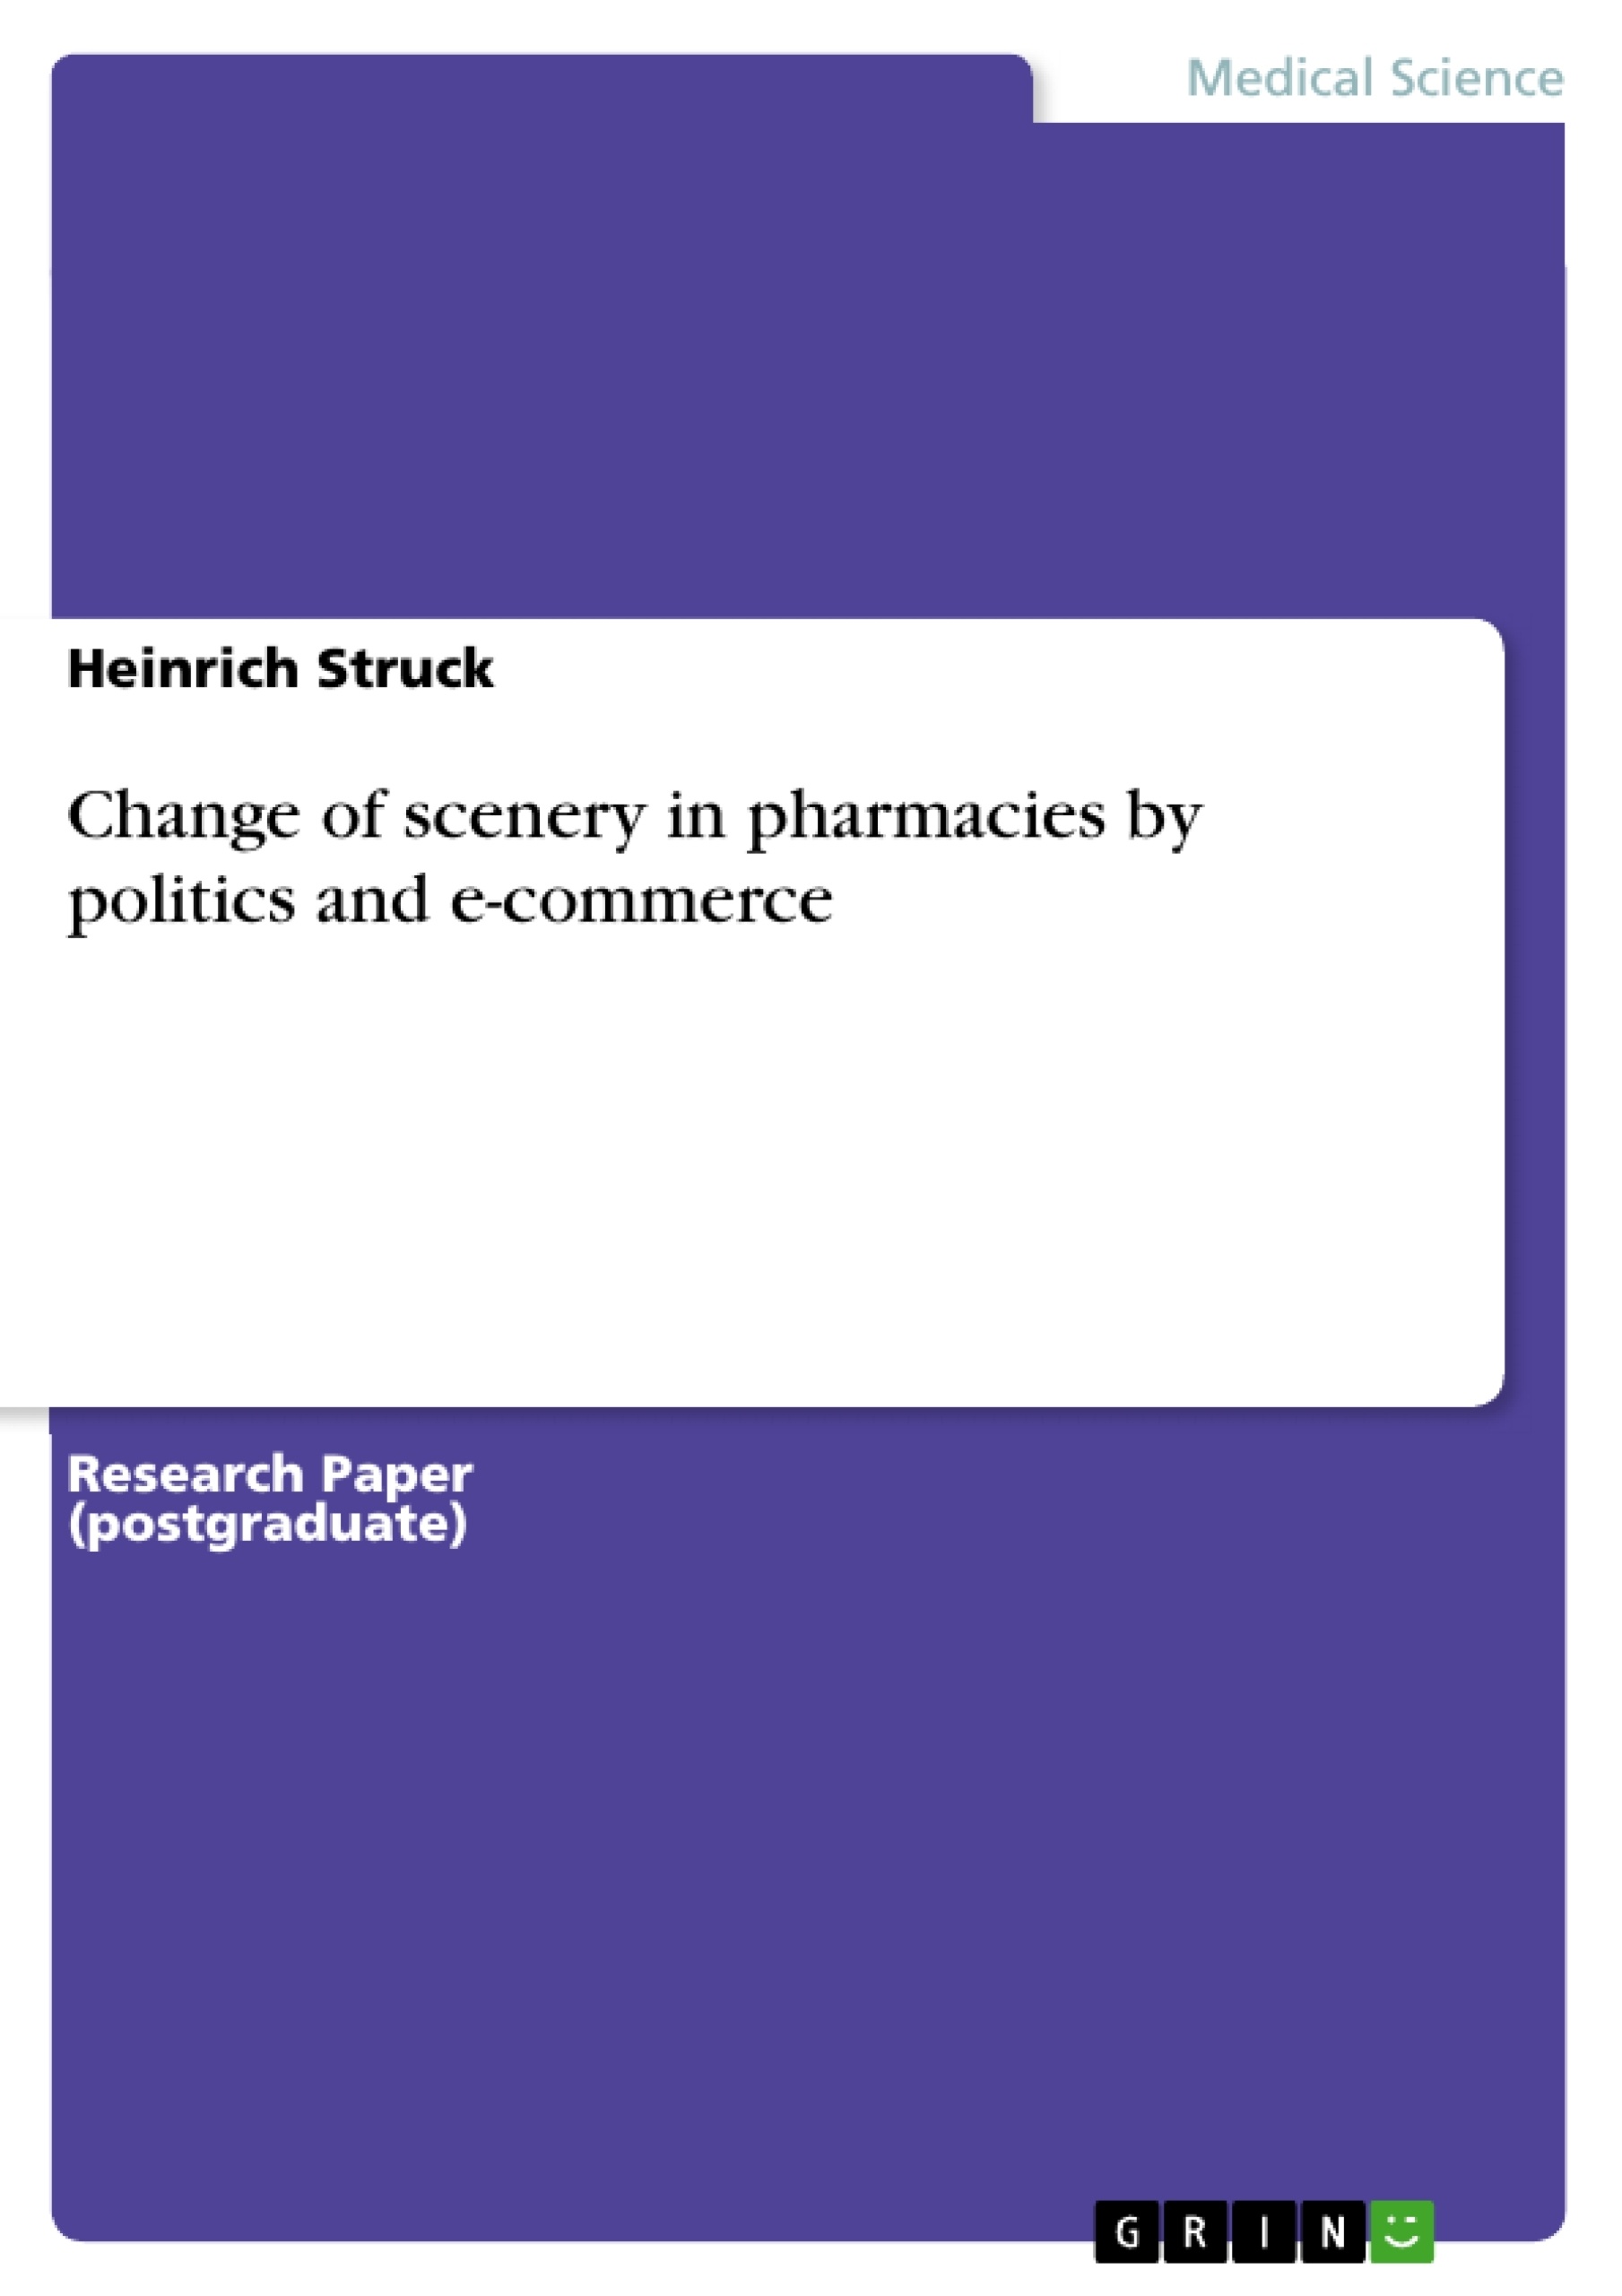 Title: Change of scenery in pharmacies by politics and e-commerce